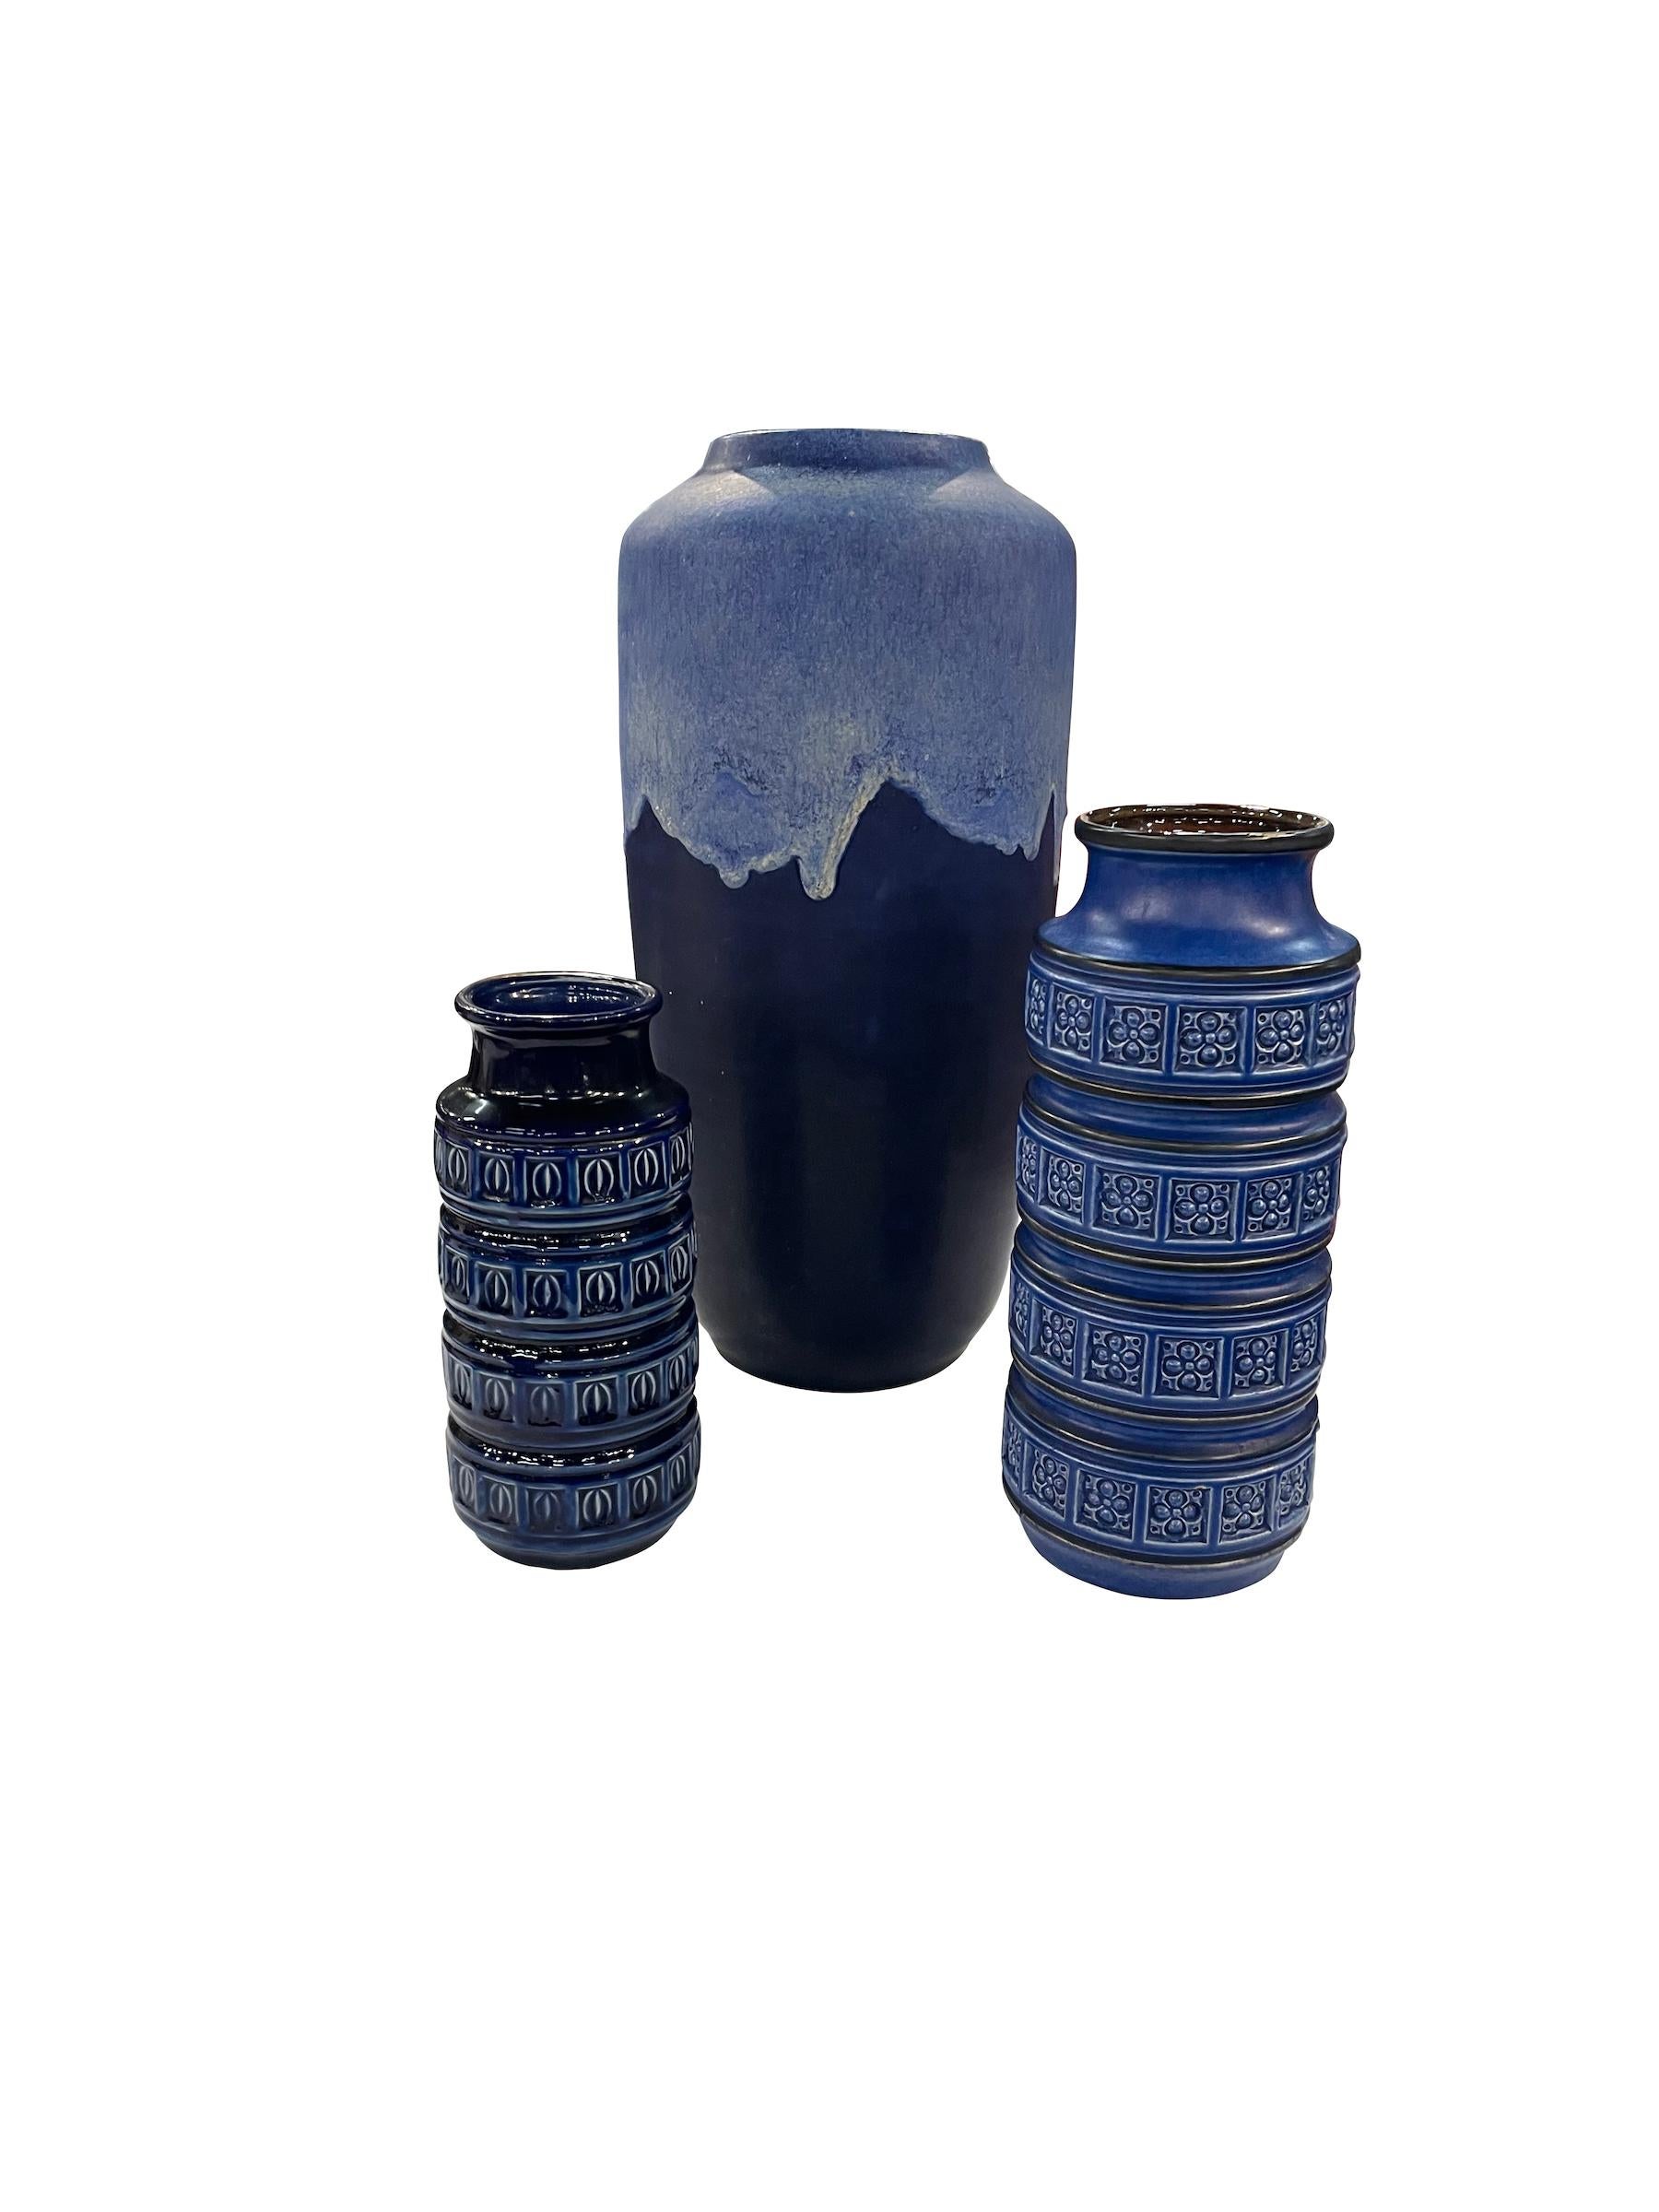 Cobalt Blue With Raised Geometric Design Bands Vase, Germany, Mid Century For Sale 2